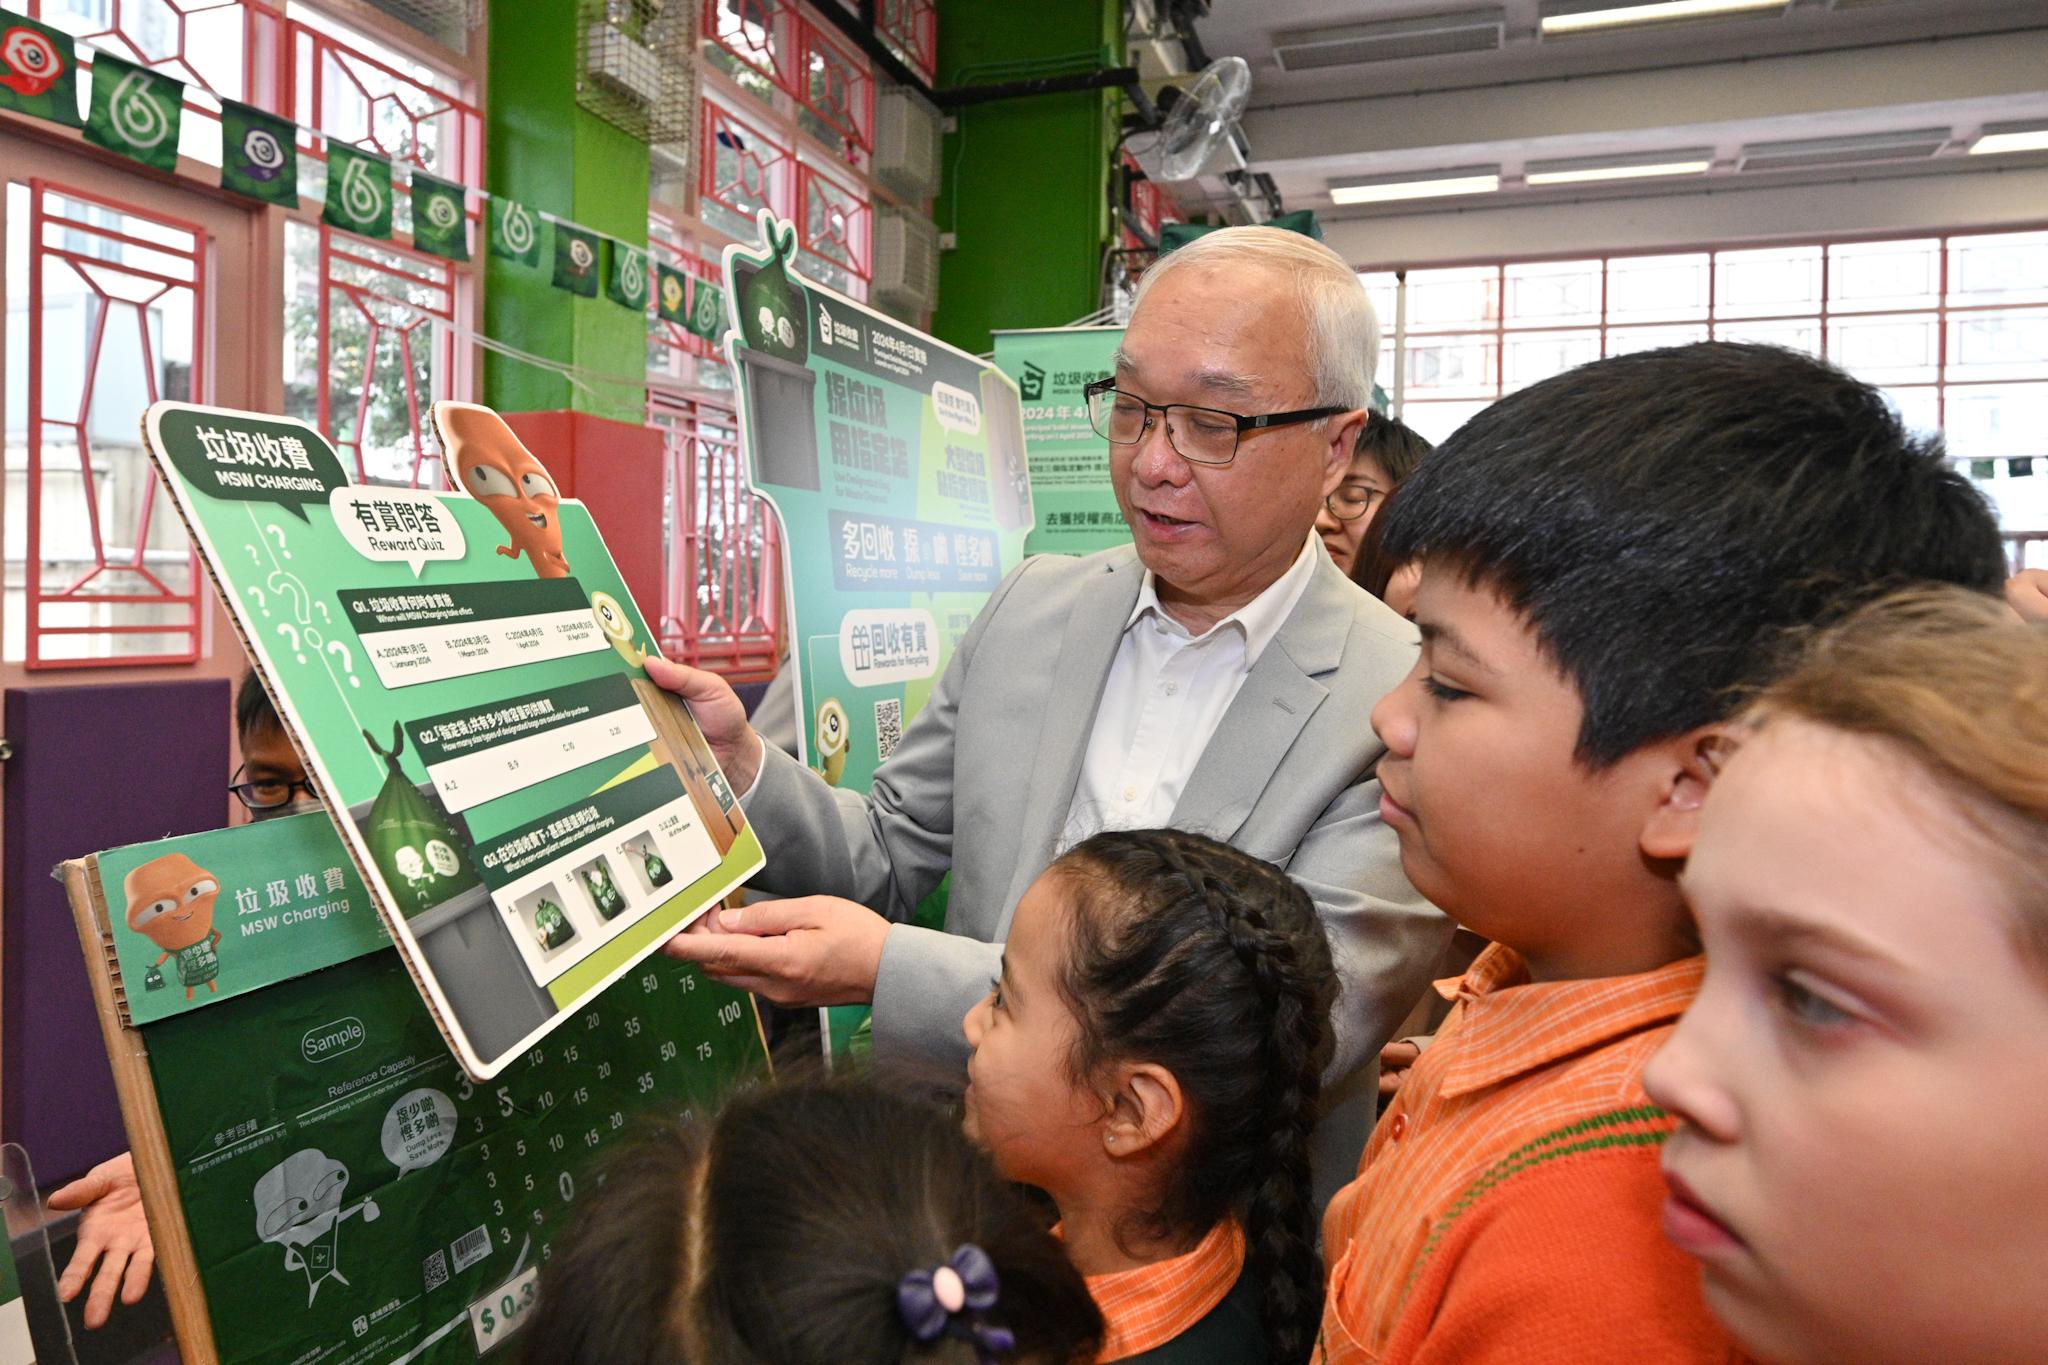 The Secretary for Environment and Ecology, Mr Tse Chin-wan, and the Under Secretary for Education, Mr Sze Chun-fai, today (January 16) visited the Yaumati Kaifong Association School to promote municipal solid waste charging to students. Photo shows Mr Tse browsing the information board on municipal solid waste charging with school students.